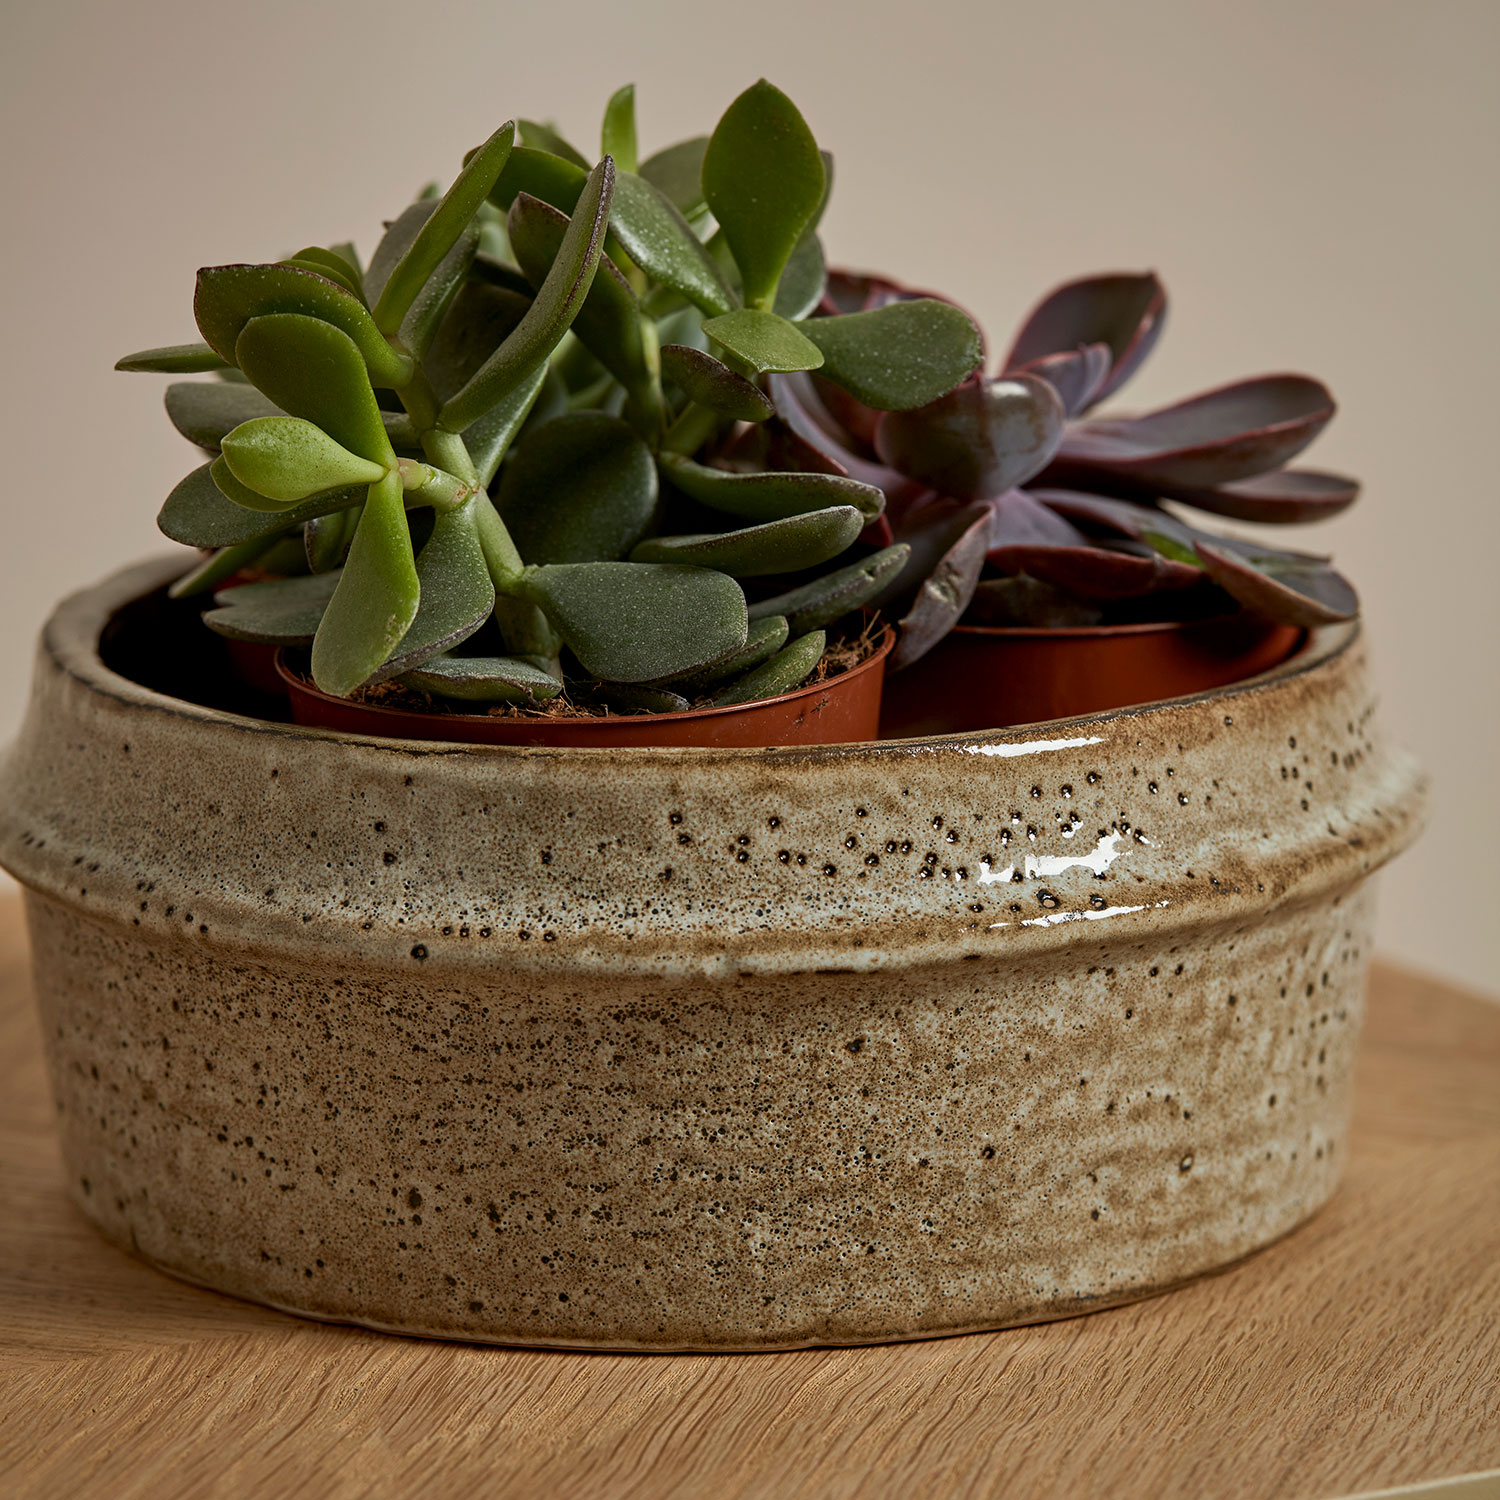 Marton Plant Pot Small Stone on a wooden surface